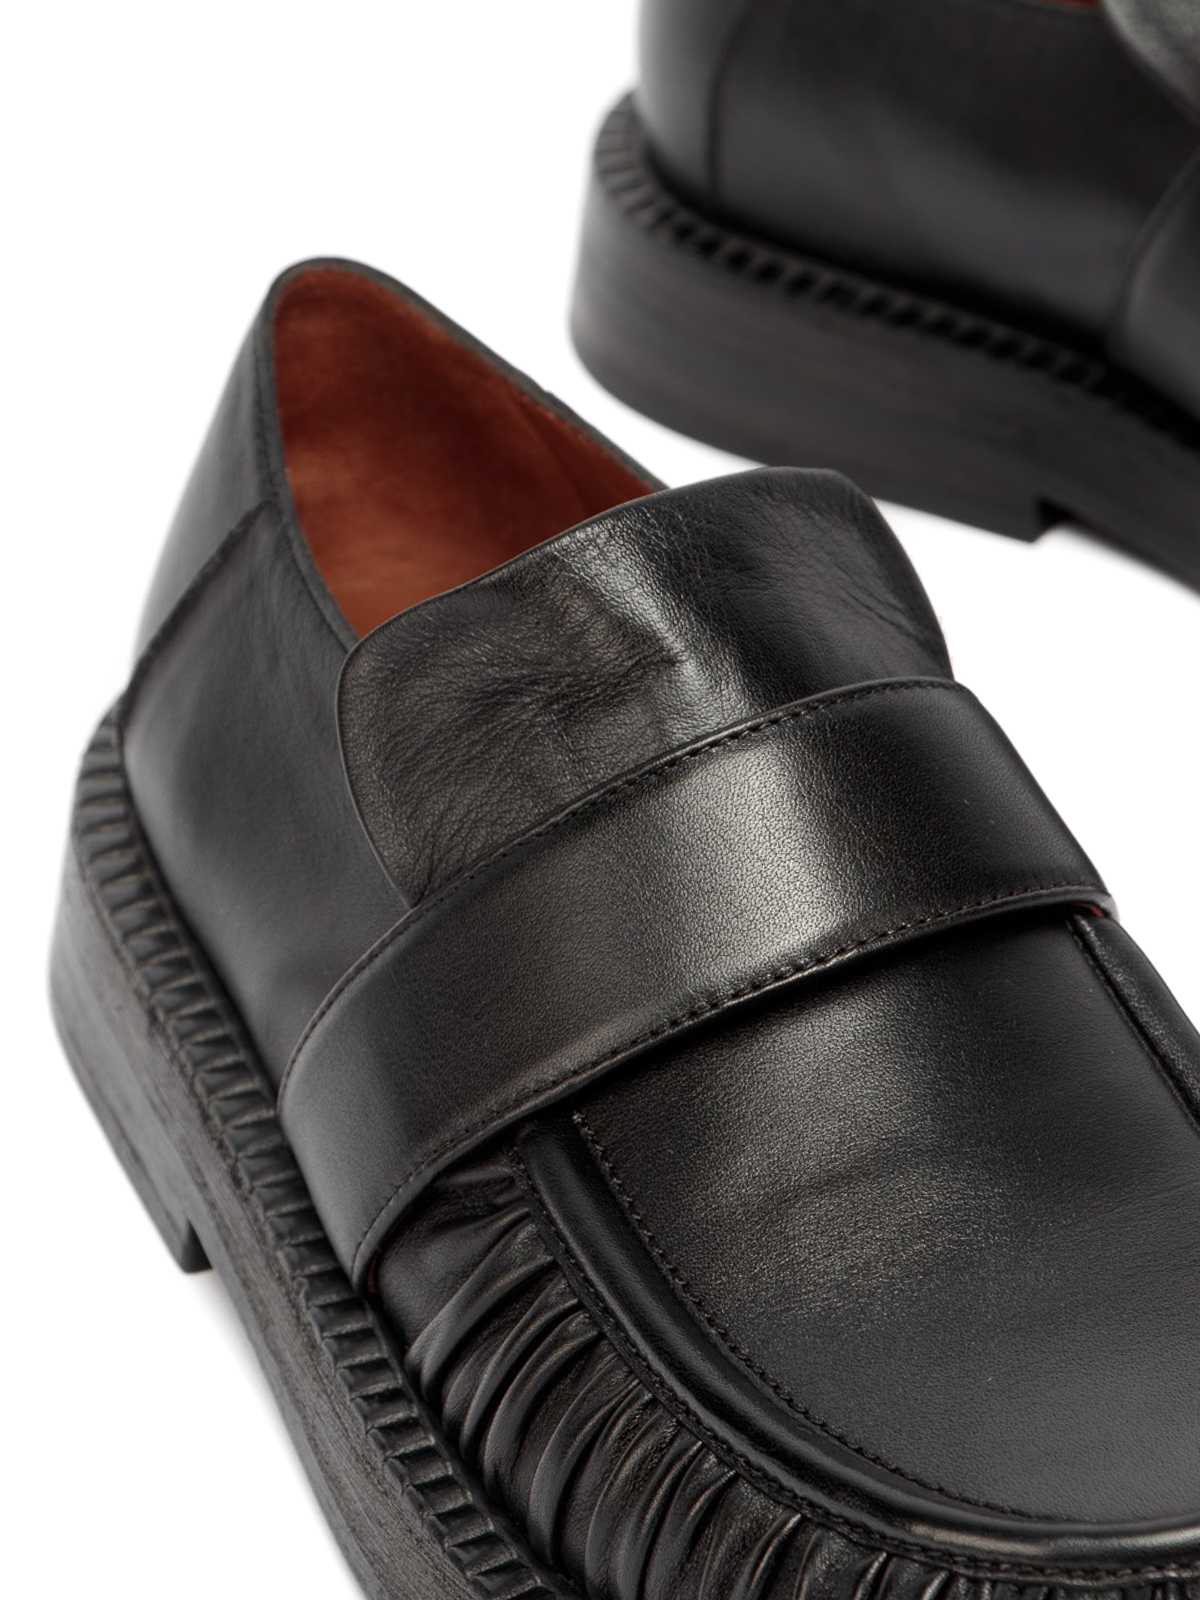 Marsèll Alluce grained leather loafers - Black